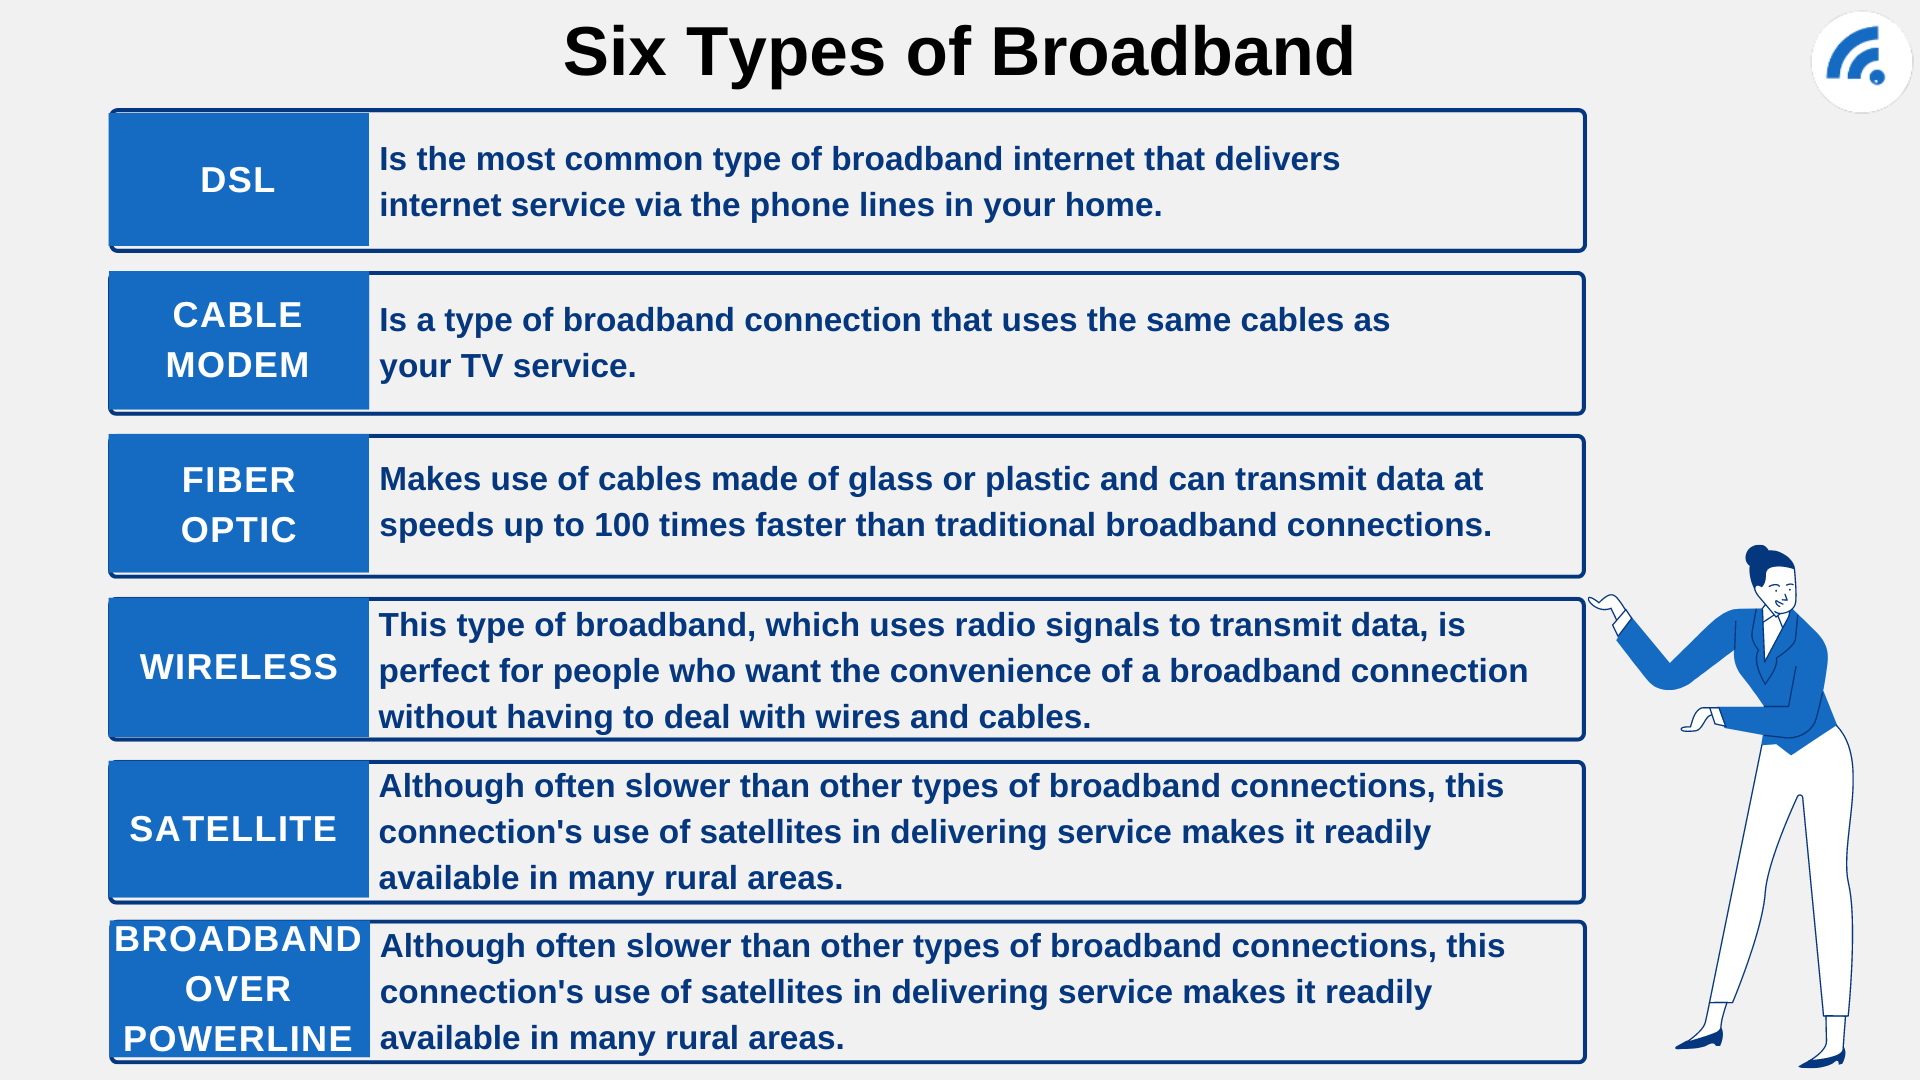 A Beginner’s Guide to Broadband Internet and Choosing a Provider